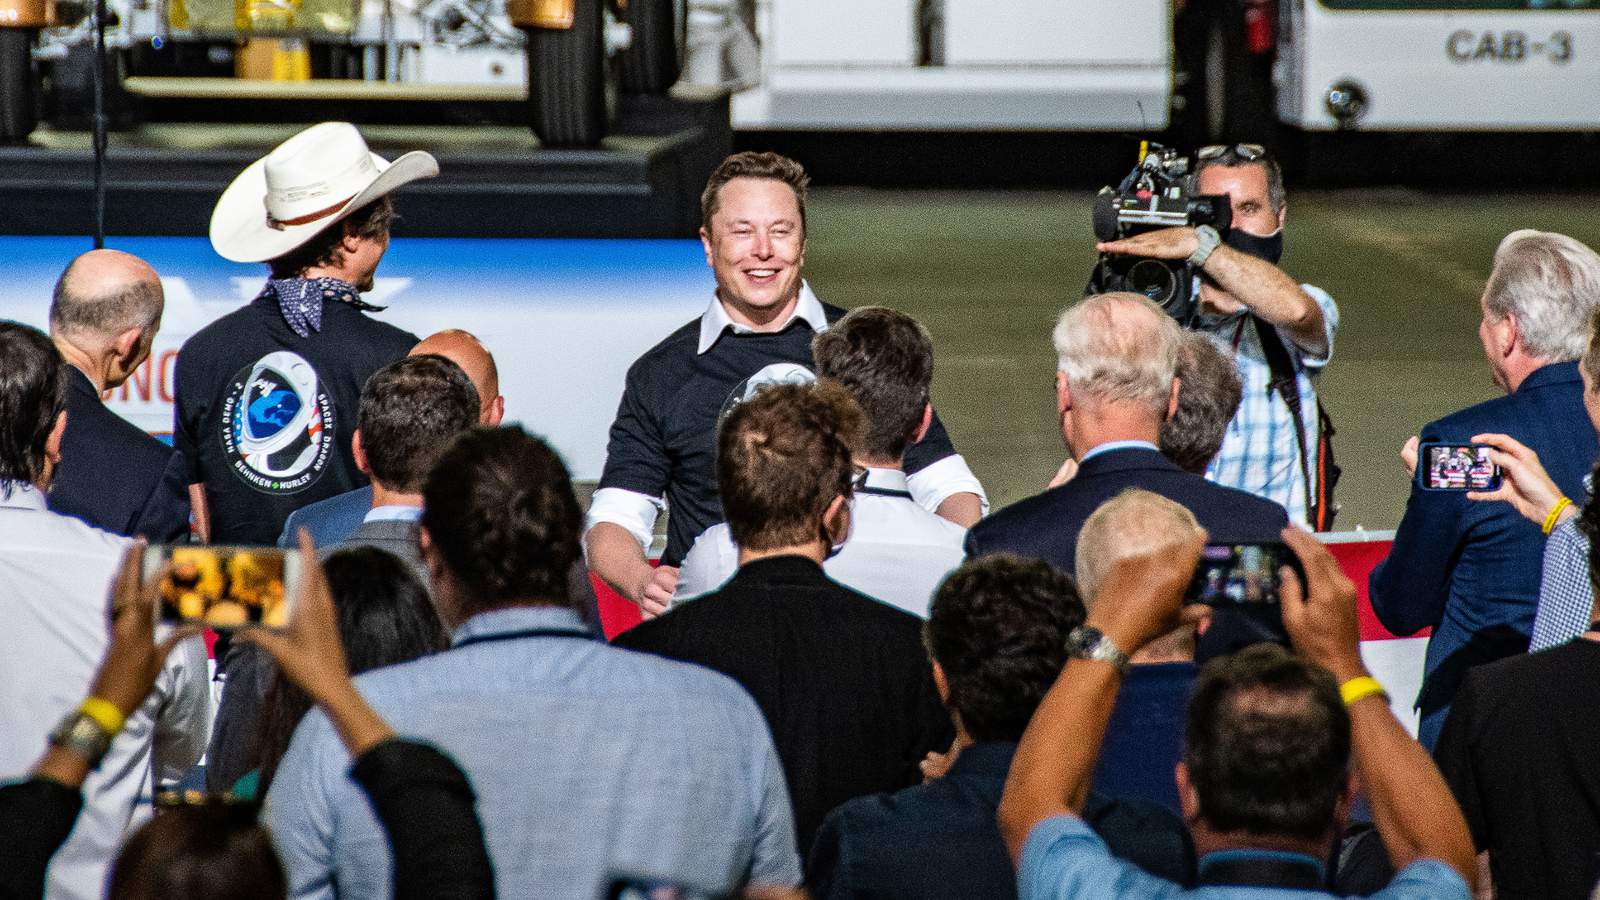 SpaceX CEO Elon Musk tests positive and negative for COVID-19 ahead of Crew 1 launch, awaiting lab results